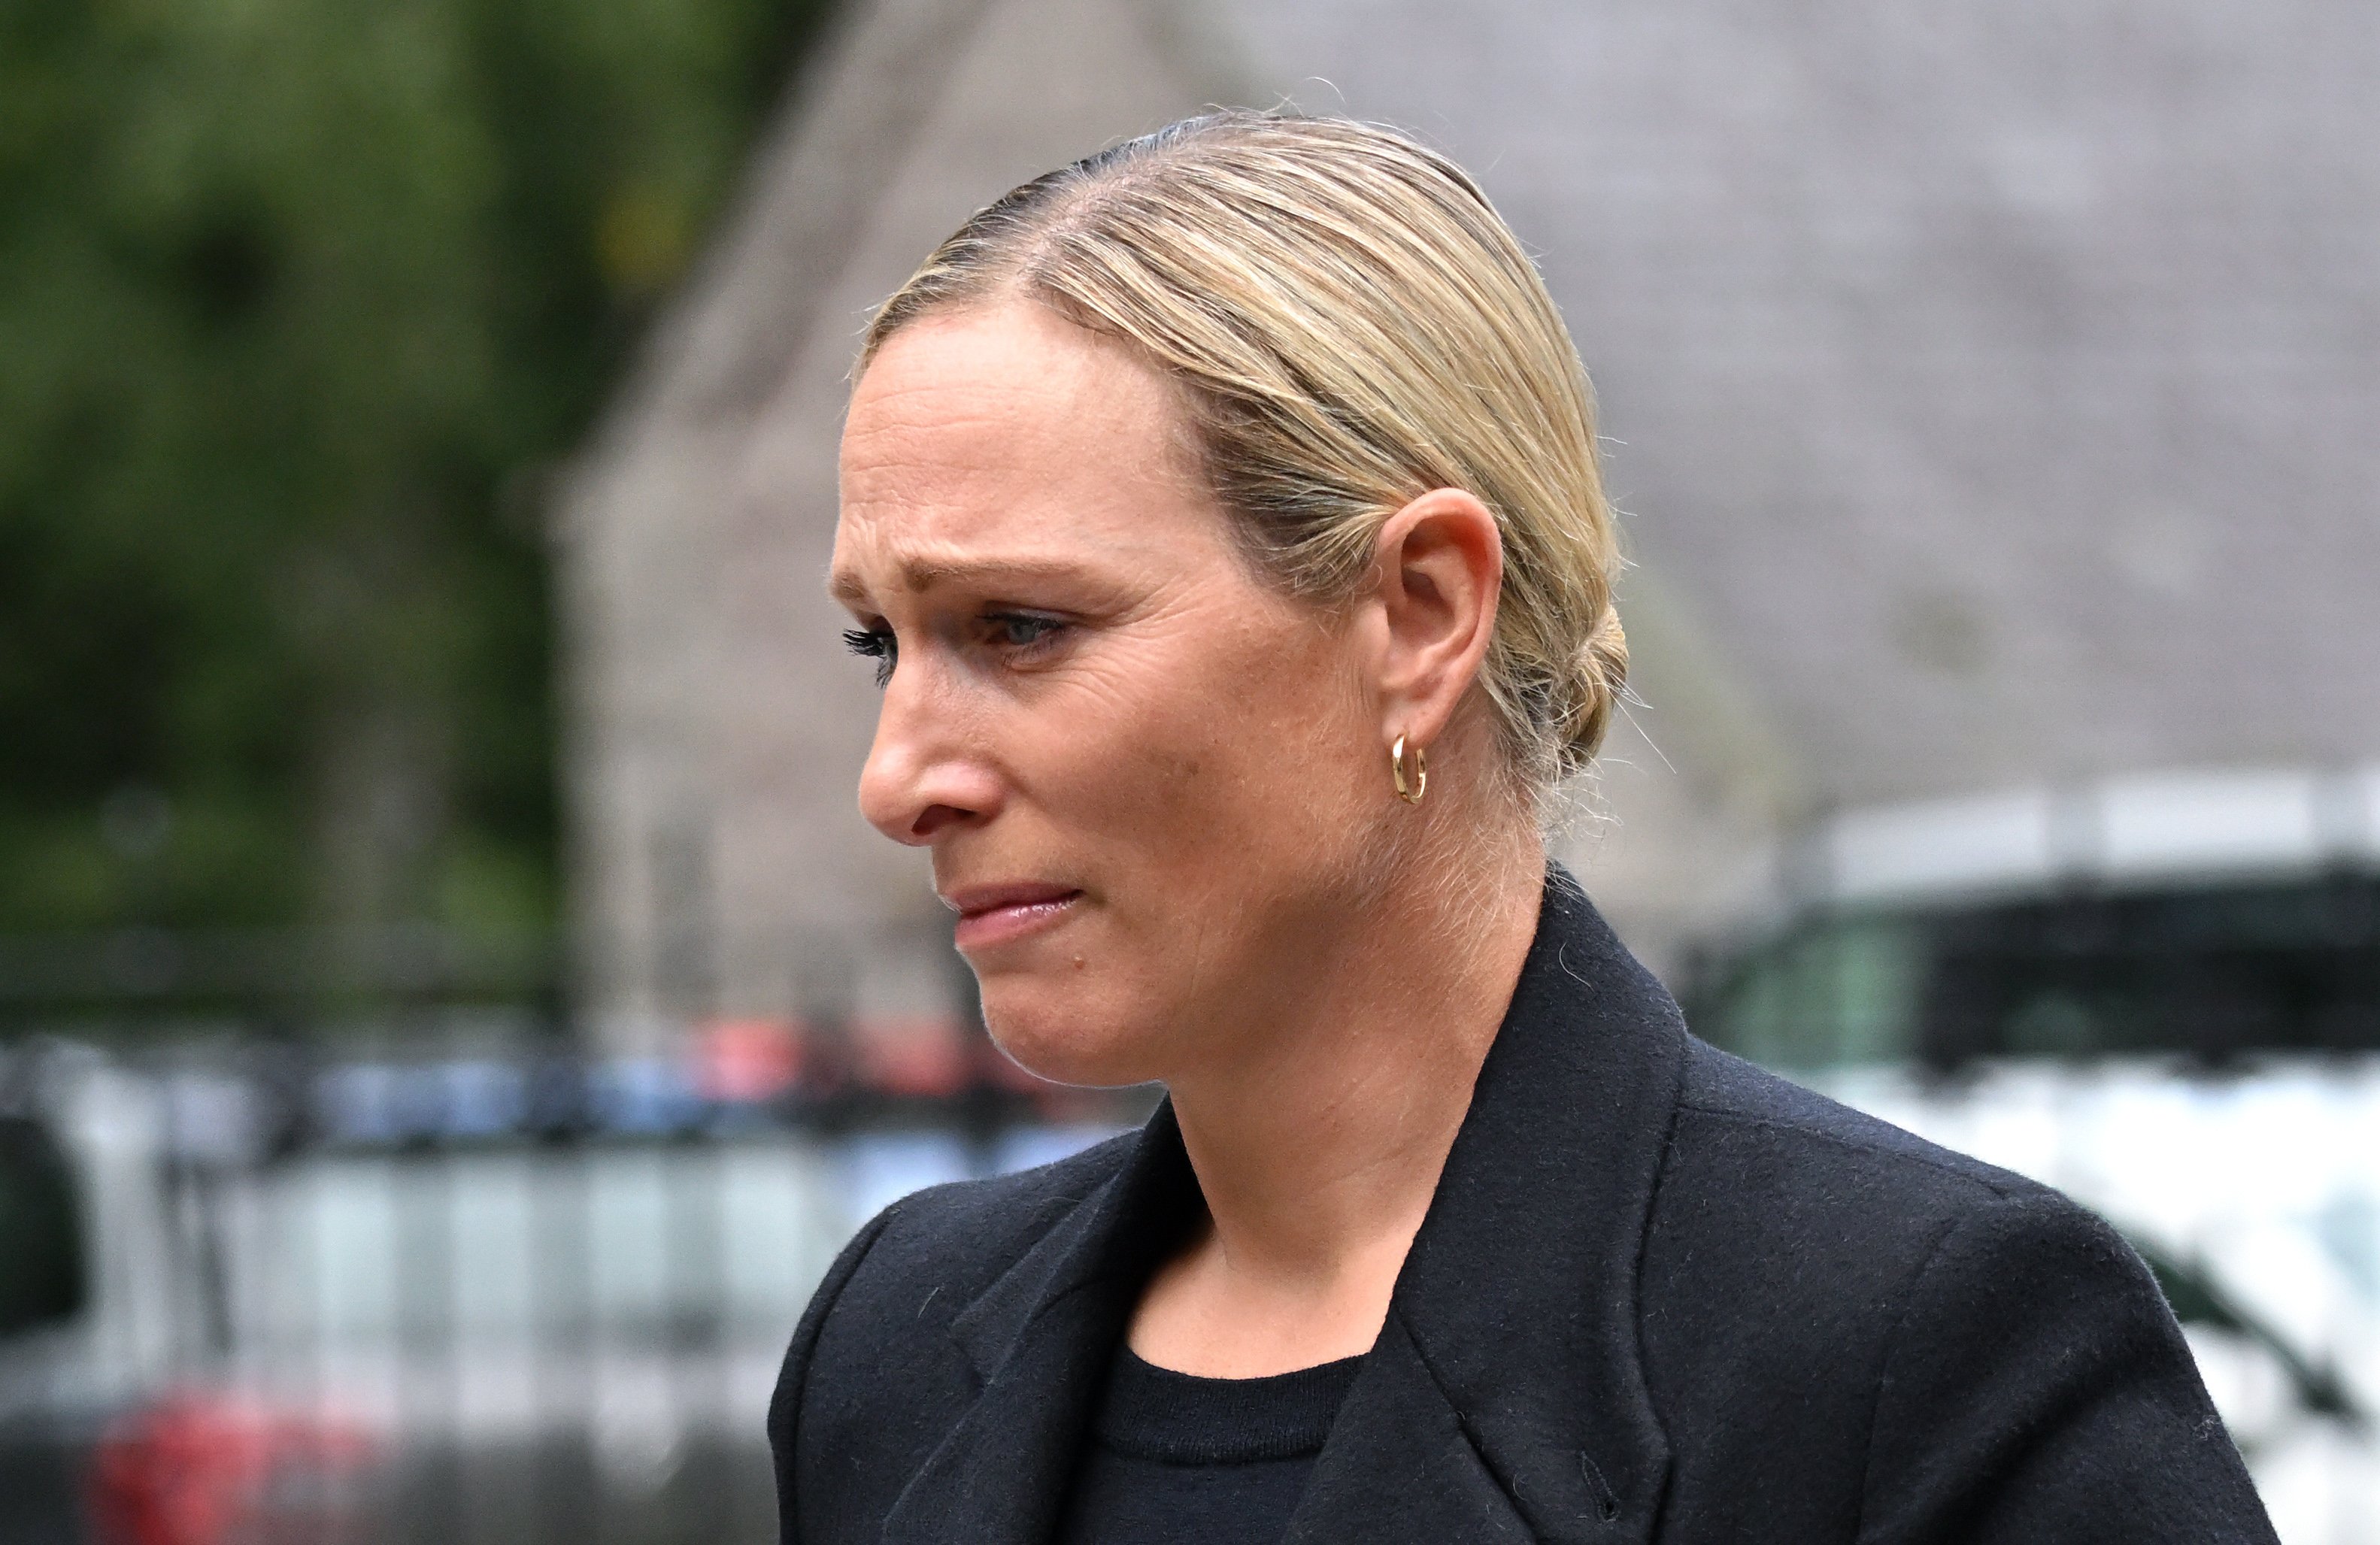 Zara Phillips looks tearful outside the gates of Balmoral Castle on September 10, 2022 in Aberdeen, Scotland | Source: Getty Images